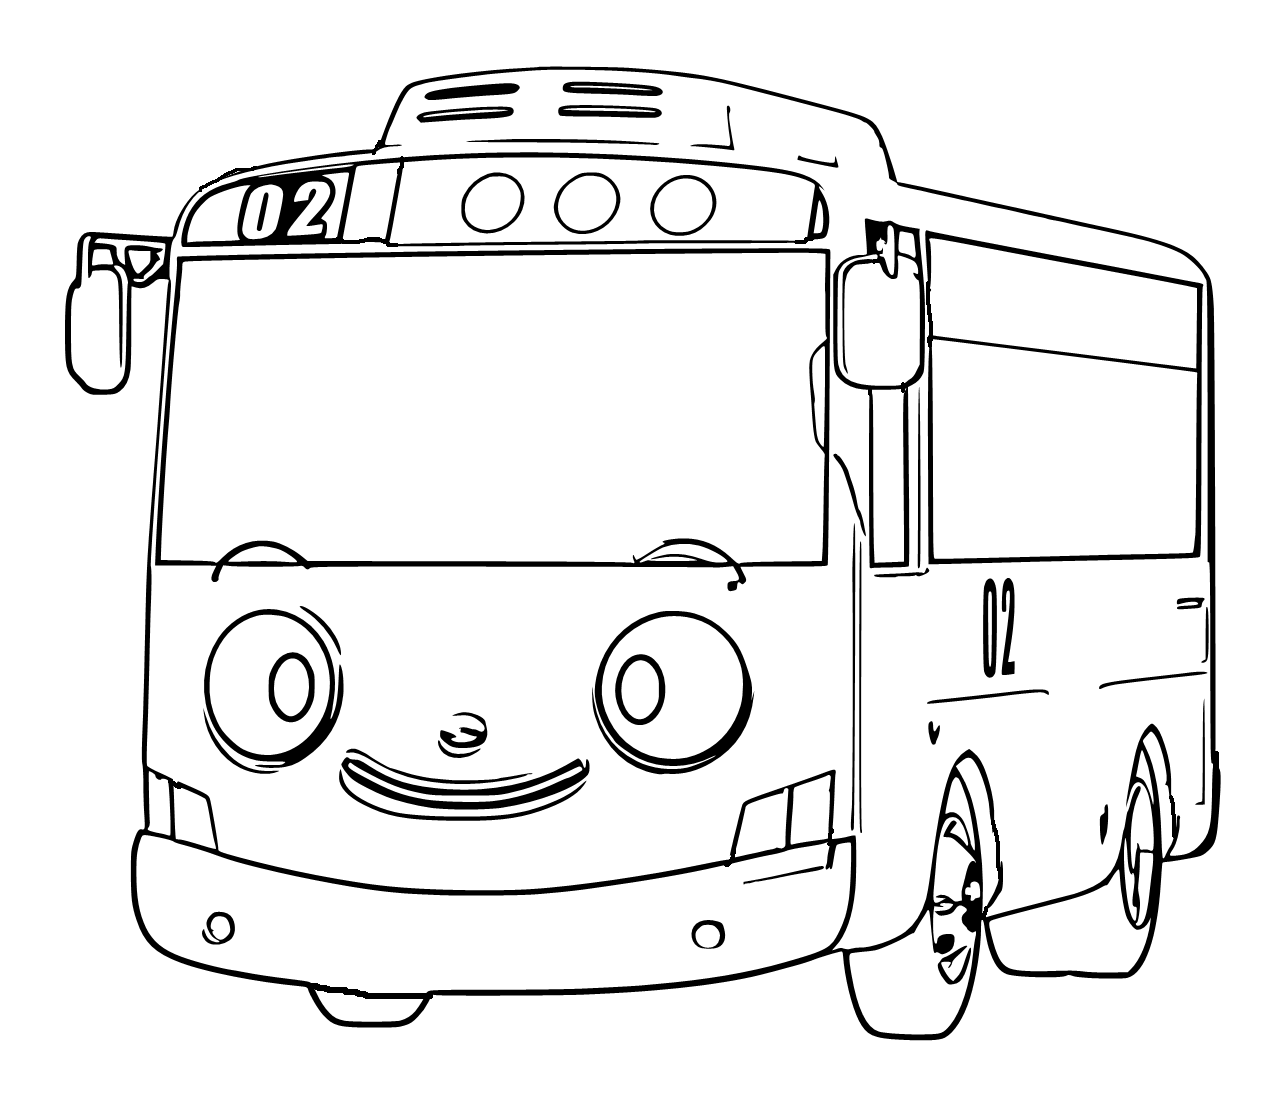 Tayo Coloring Pages to download and print for free